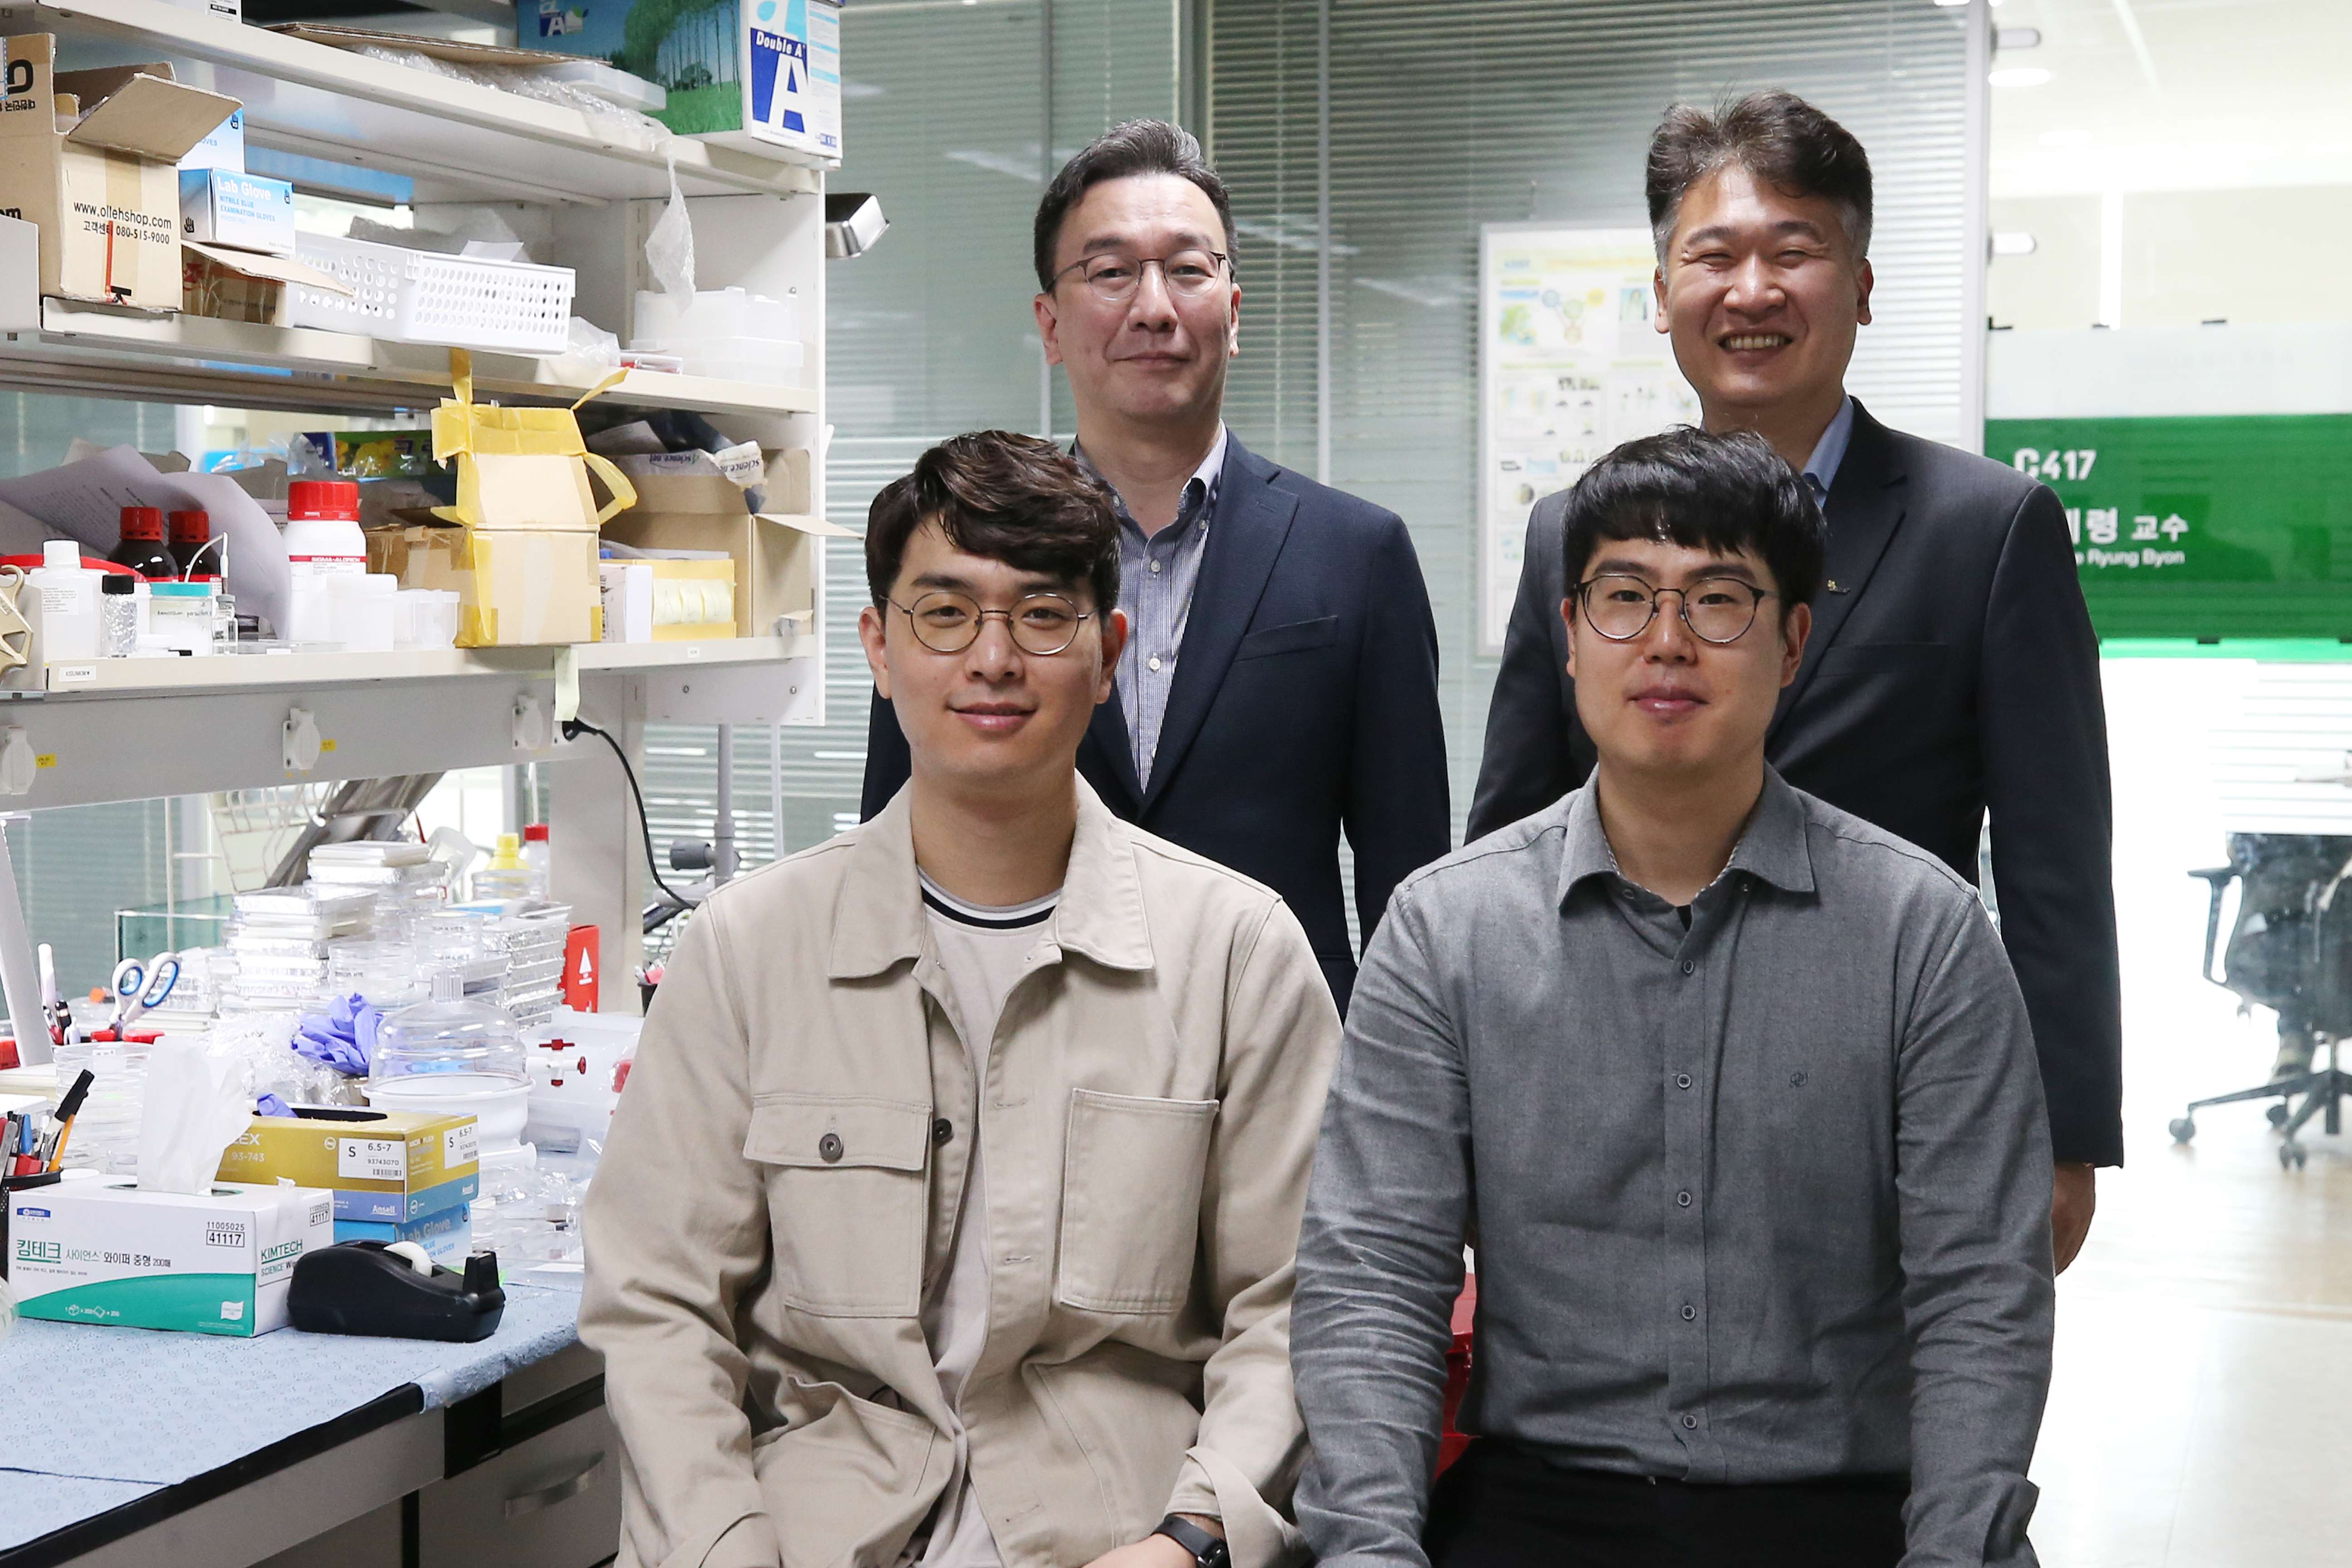 (Clockwise from back left) Professor Jung-Wuk Hong, Professor Seokwoo Jeon, Dr. Sang-Eon Lee, and PhD Candidate Donghwi Cho